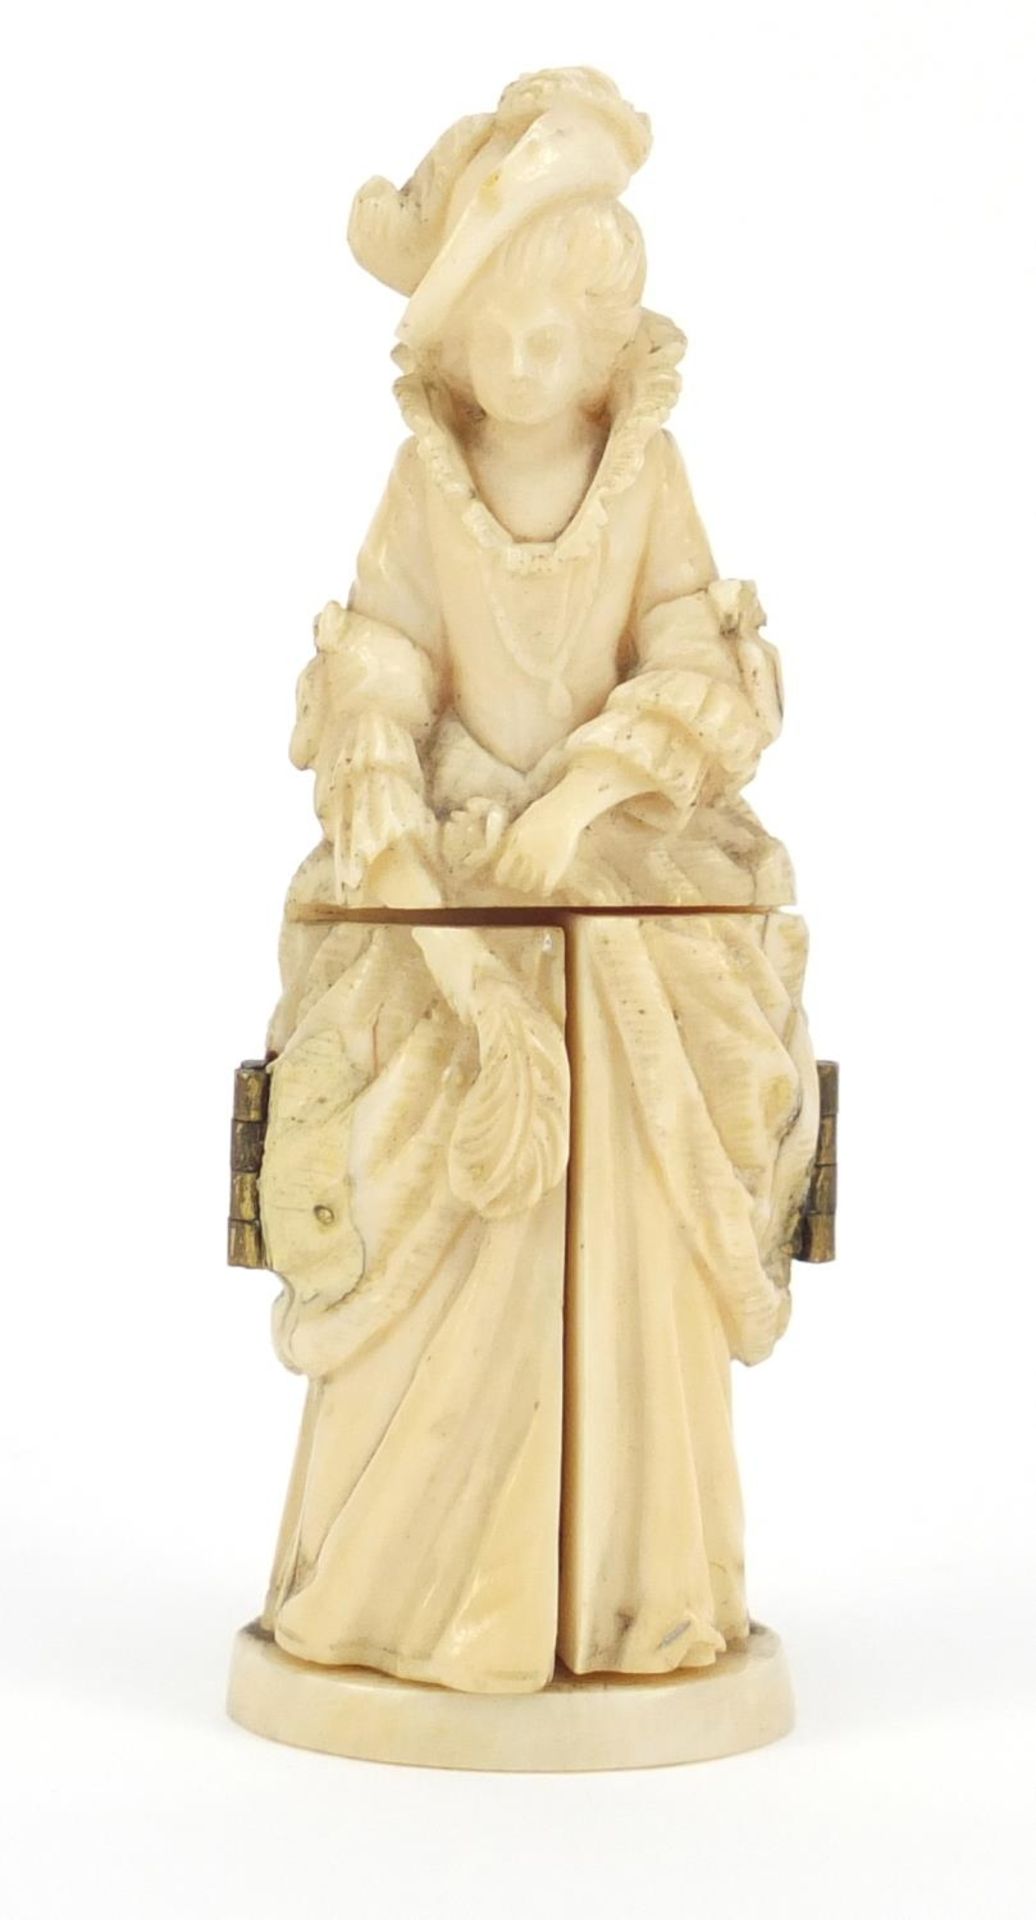 19th century French Dieppe carved ivory tryptych figure, 9cm high - Image 3 of 9